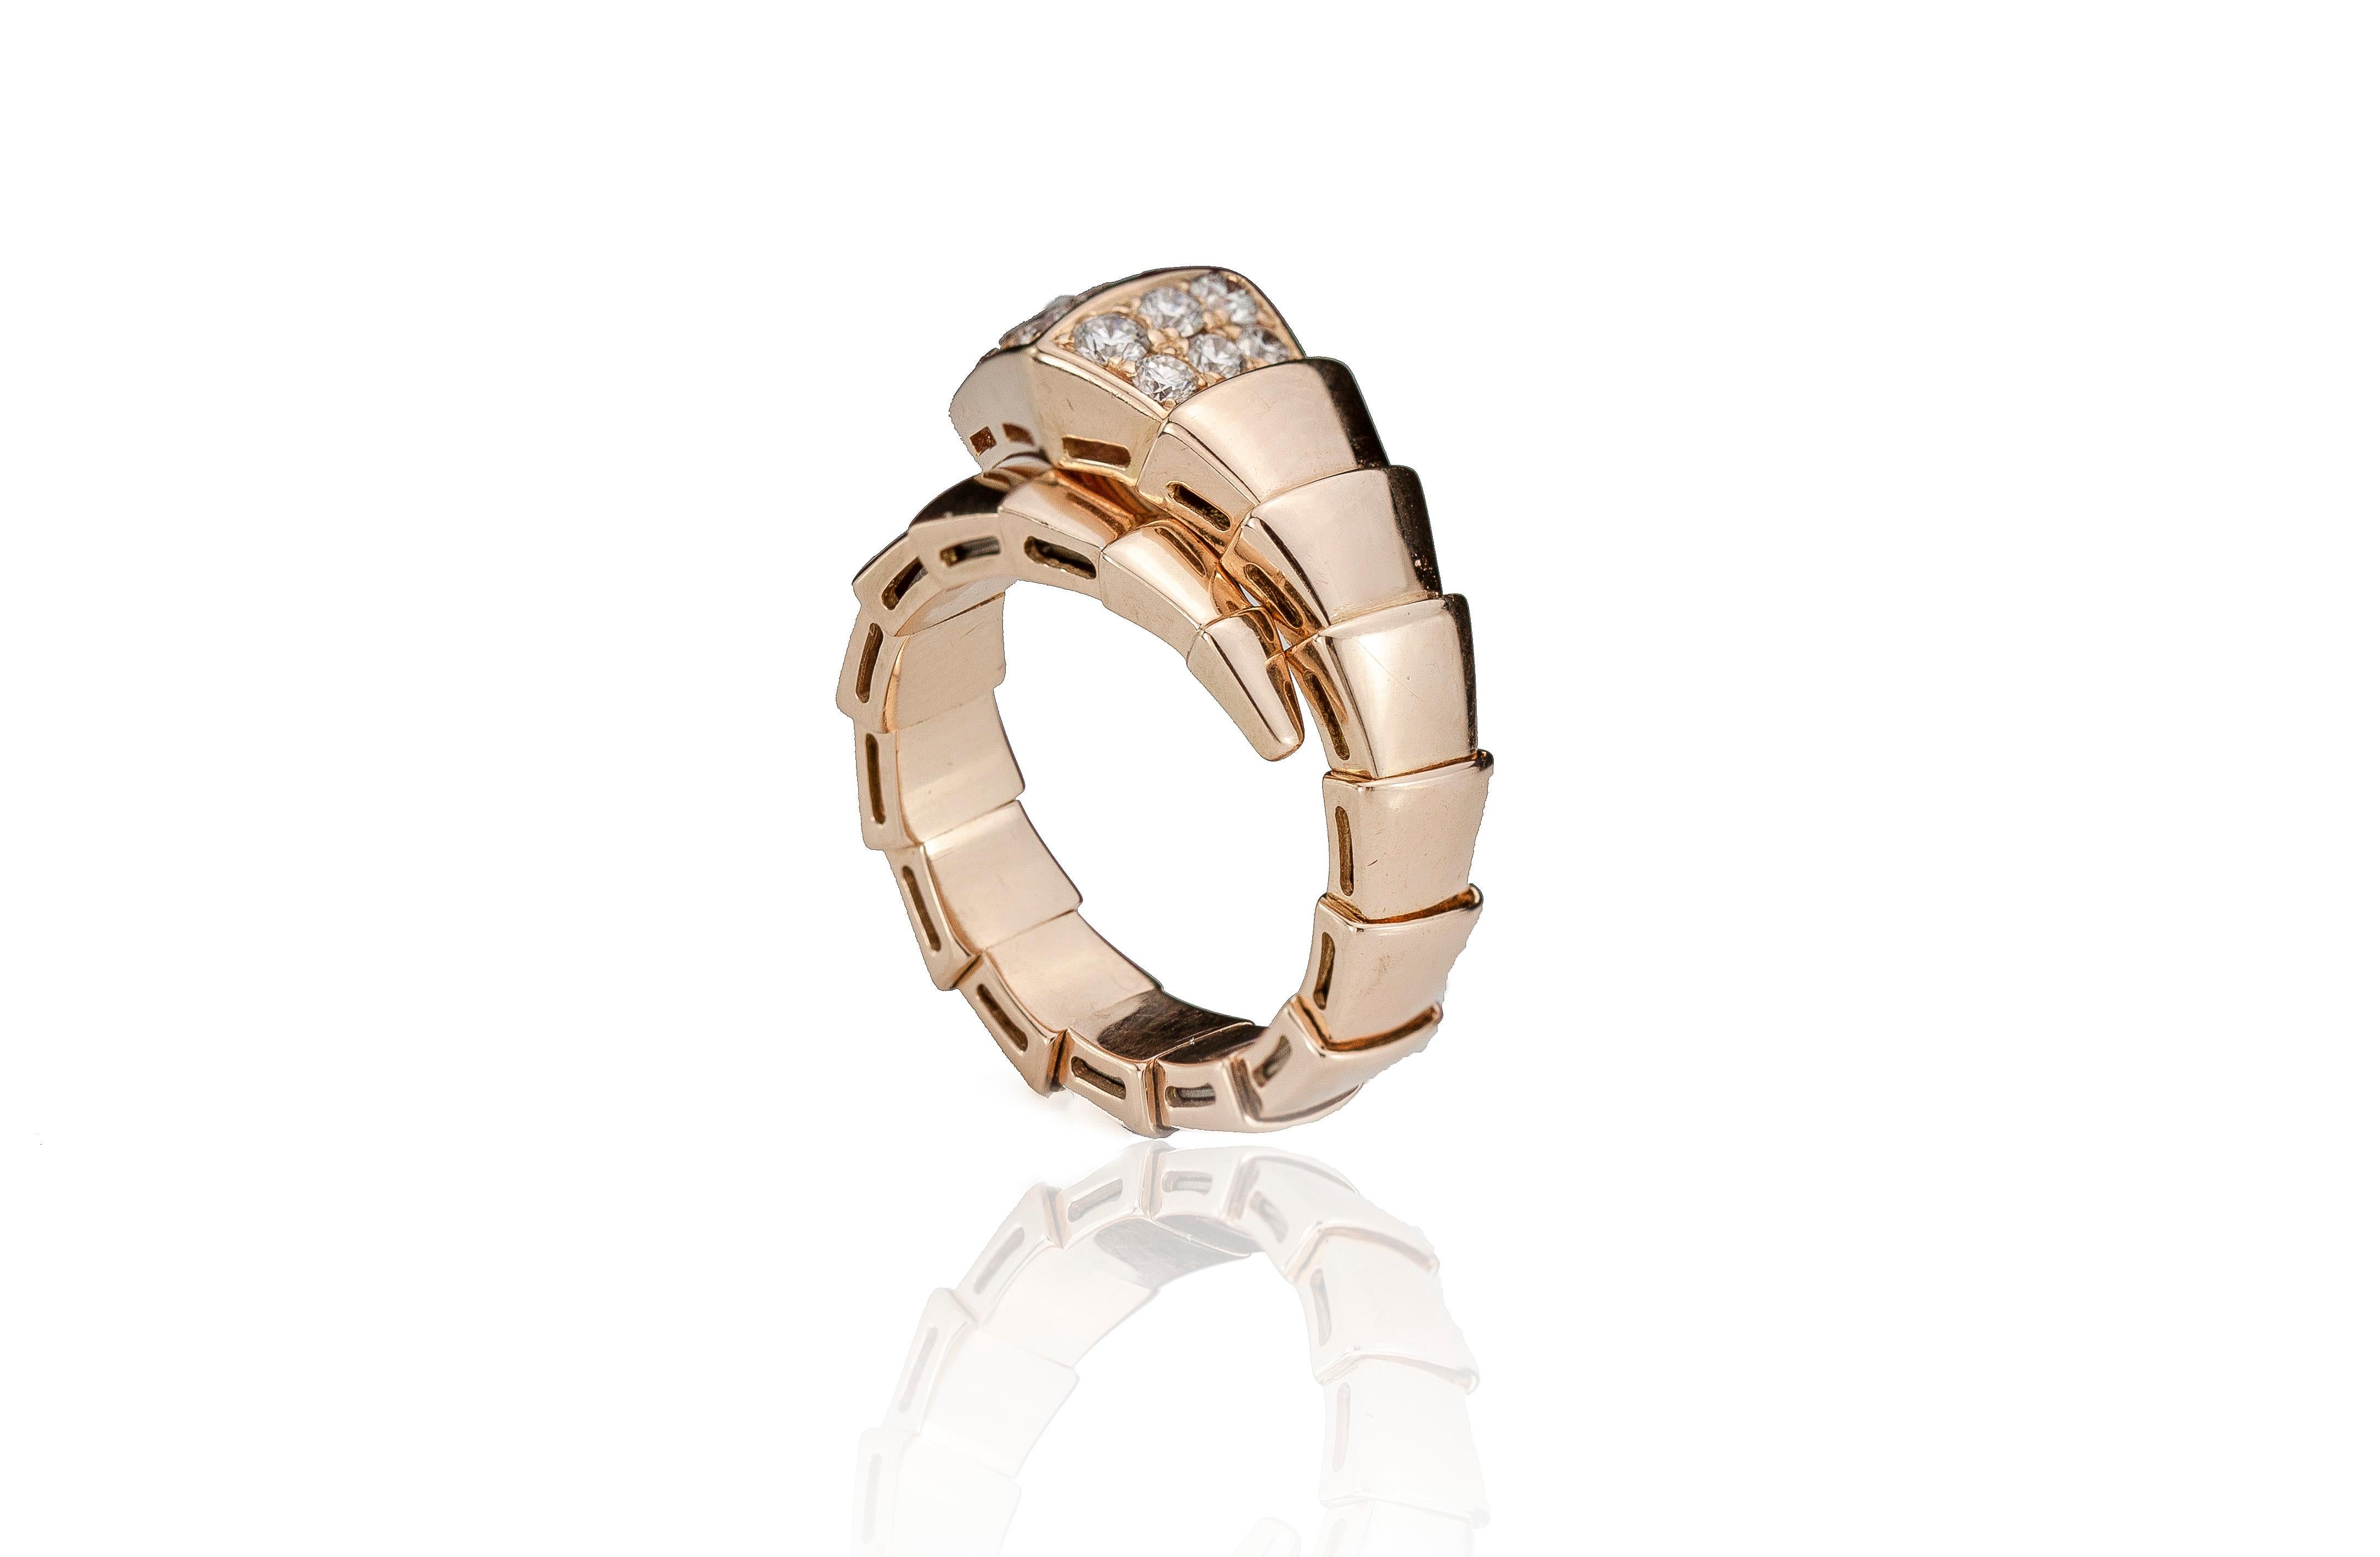 Bvlgari Serpenti 18kt pink gold ring with diamonds.
Designer: Bvlgari
Made in Italy
Fully hallmarked.

Bvlgari Serpenti jewellery designs are a tribute to their spirit animal – the serpent. Infused with elements of sensuality and femininity, these